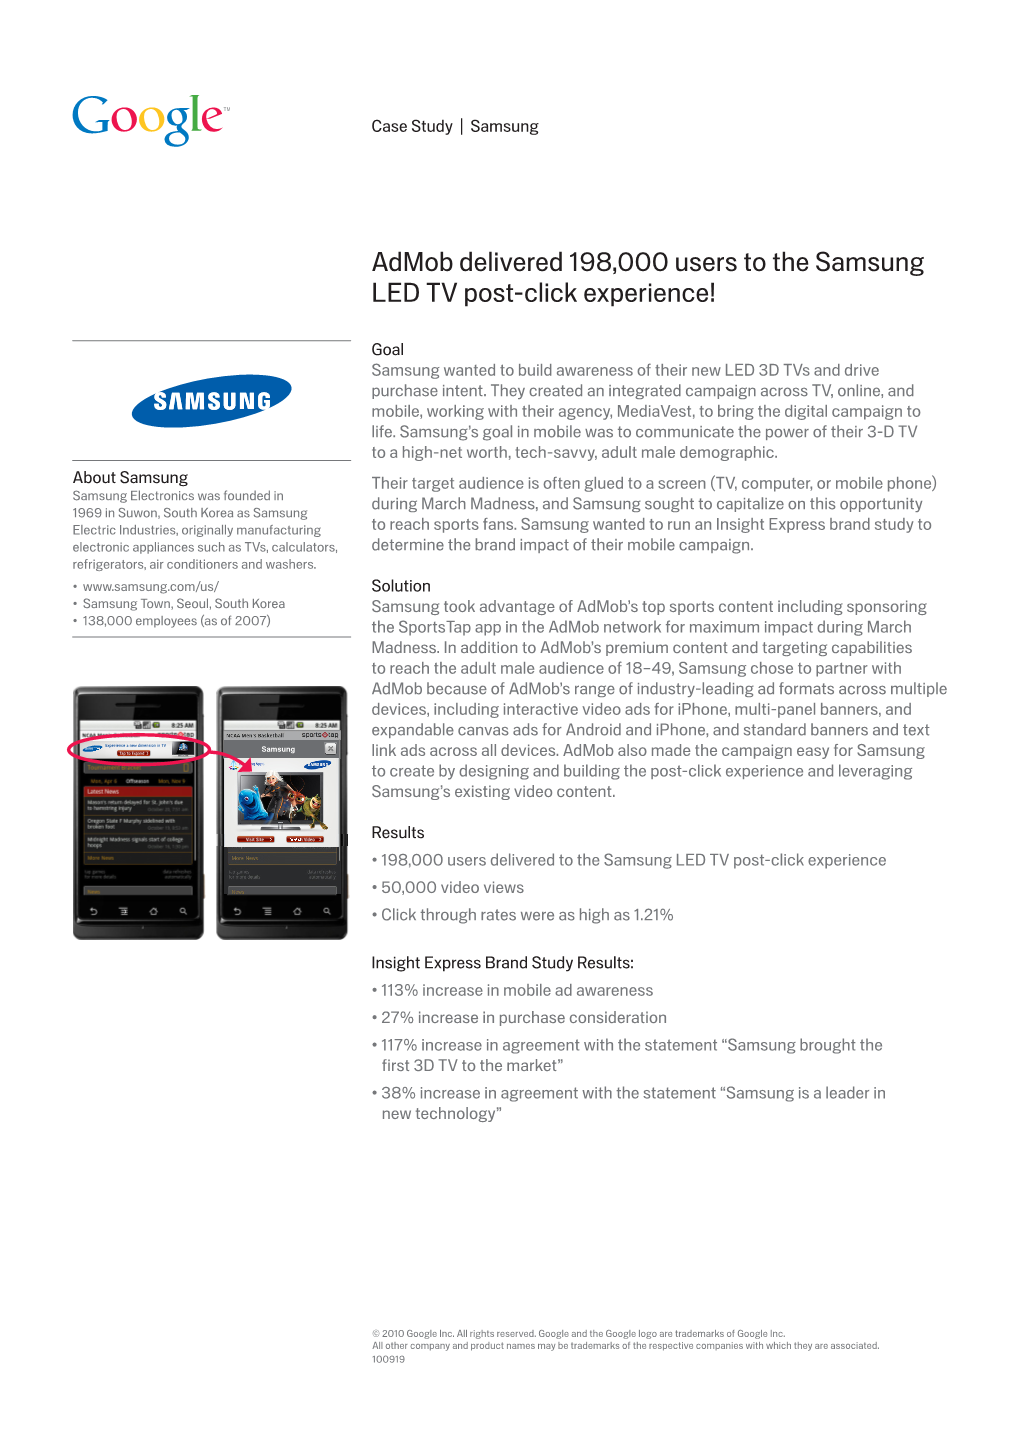 Admob Delivered 198,000 Users to the Samsung LED TV Post-Click Experience!